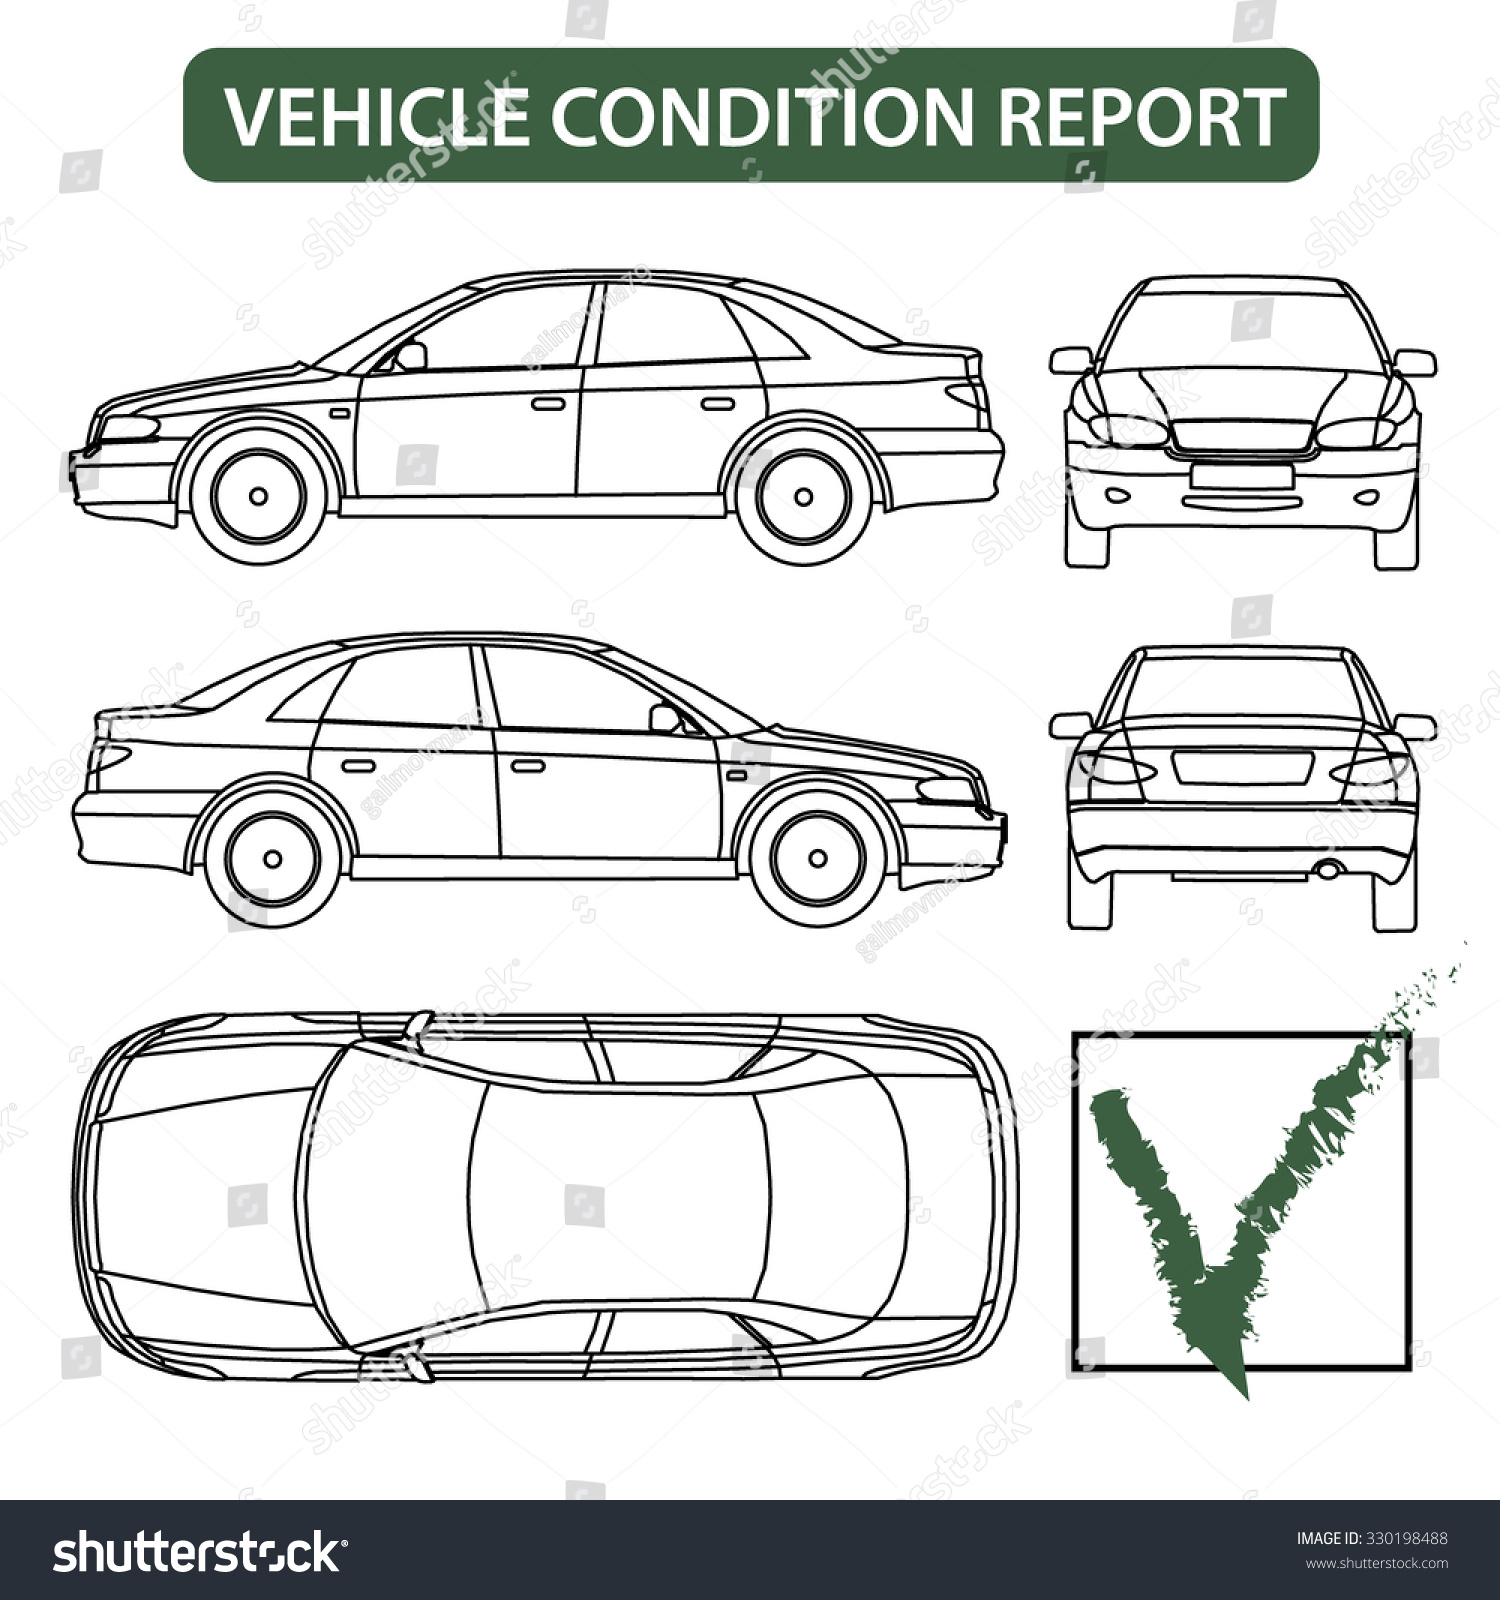 Car Condition Form Vehicle Checklist Auto Stock Vector (Royalty In Car Damage Report Template